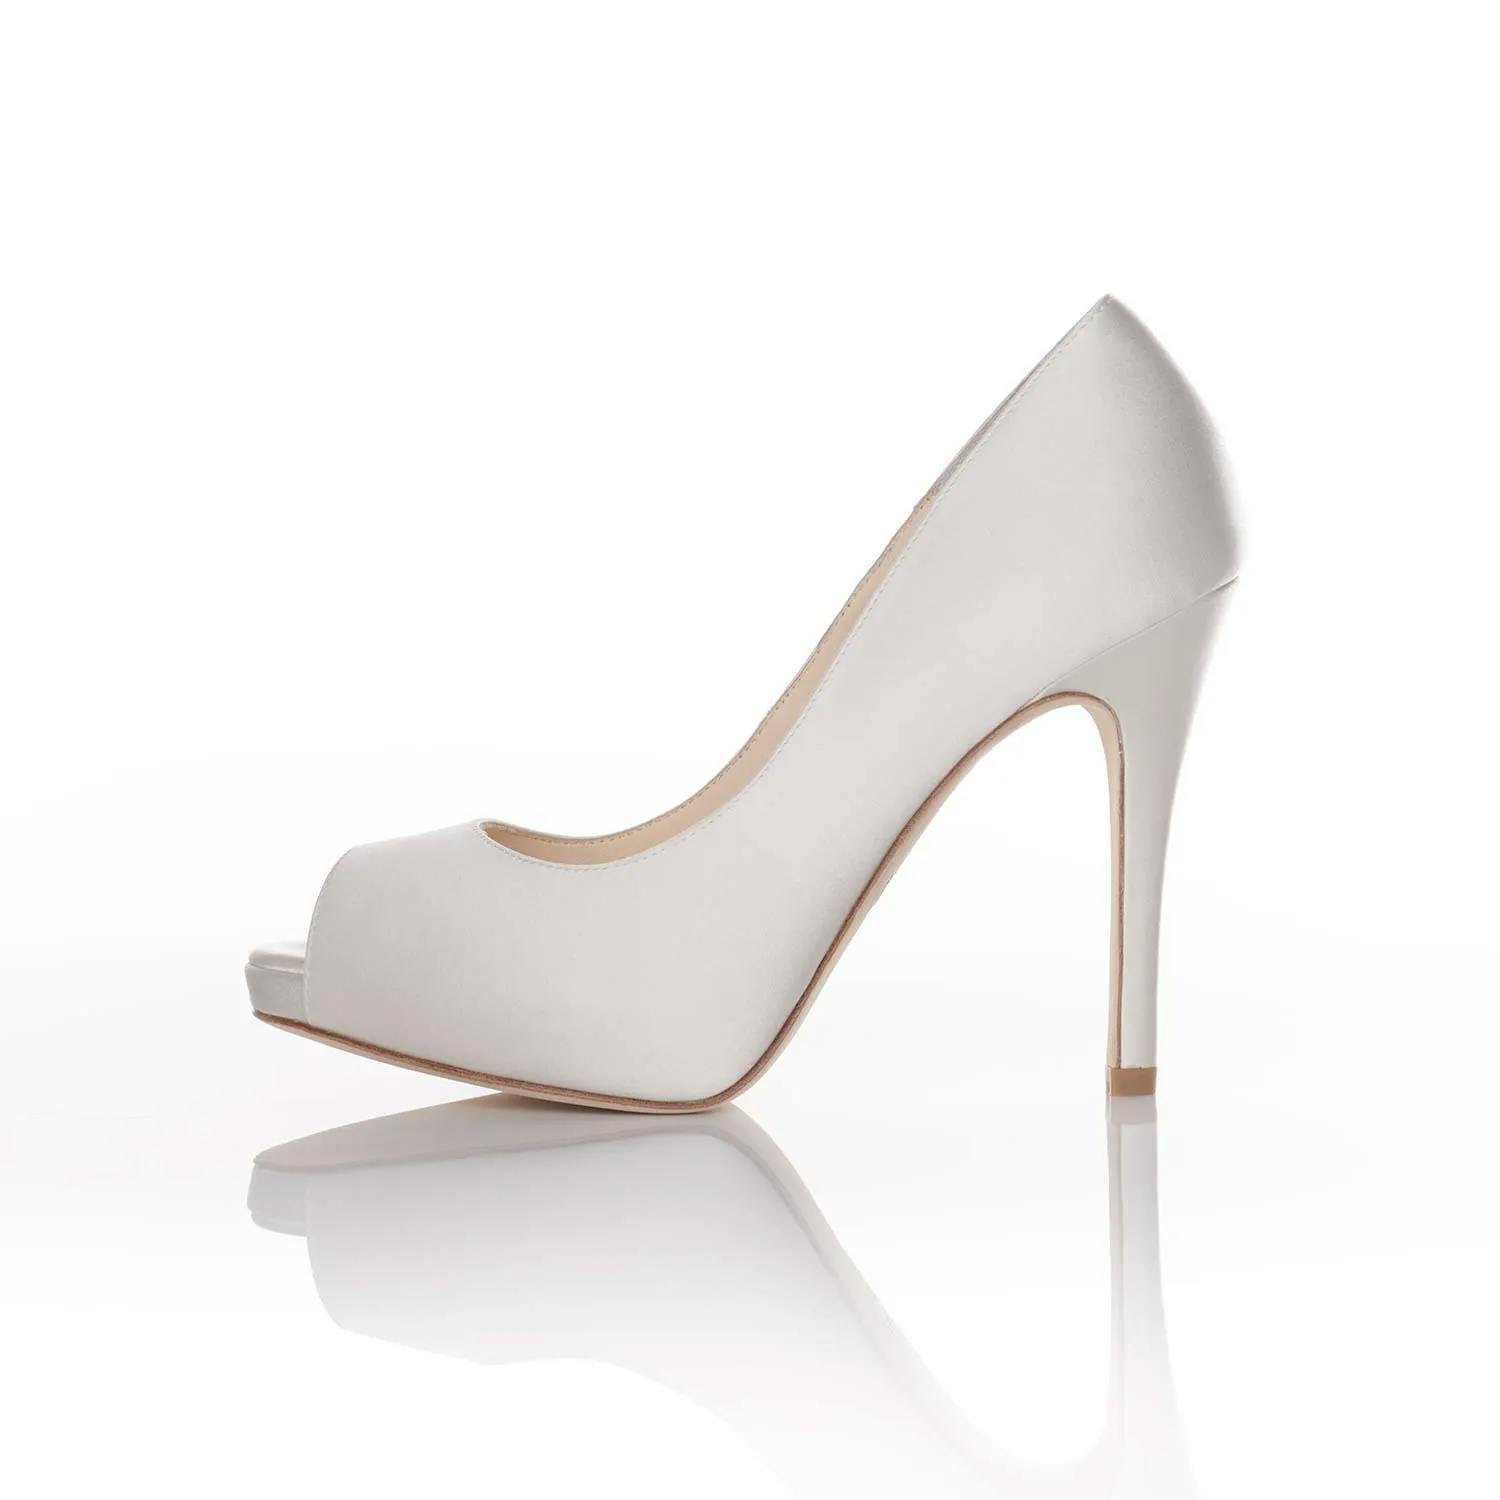 A single white high-heeled shoe with a peep-toe design, displayed on a white surface with a reflective background. The shoe has a sleek, elegant appearance with a smooth finish and a stiletto heel.